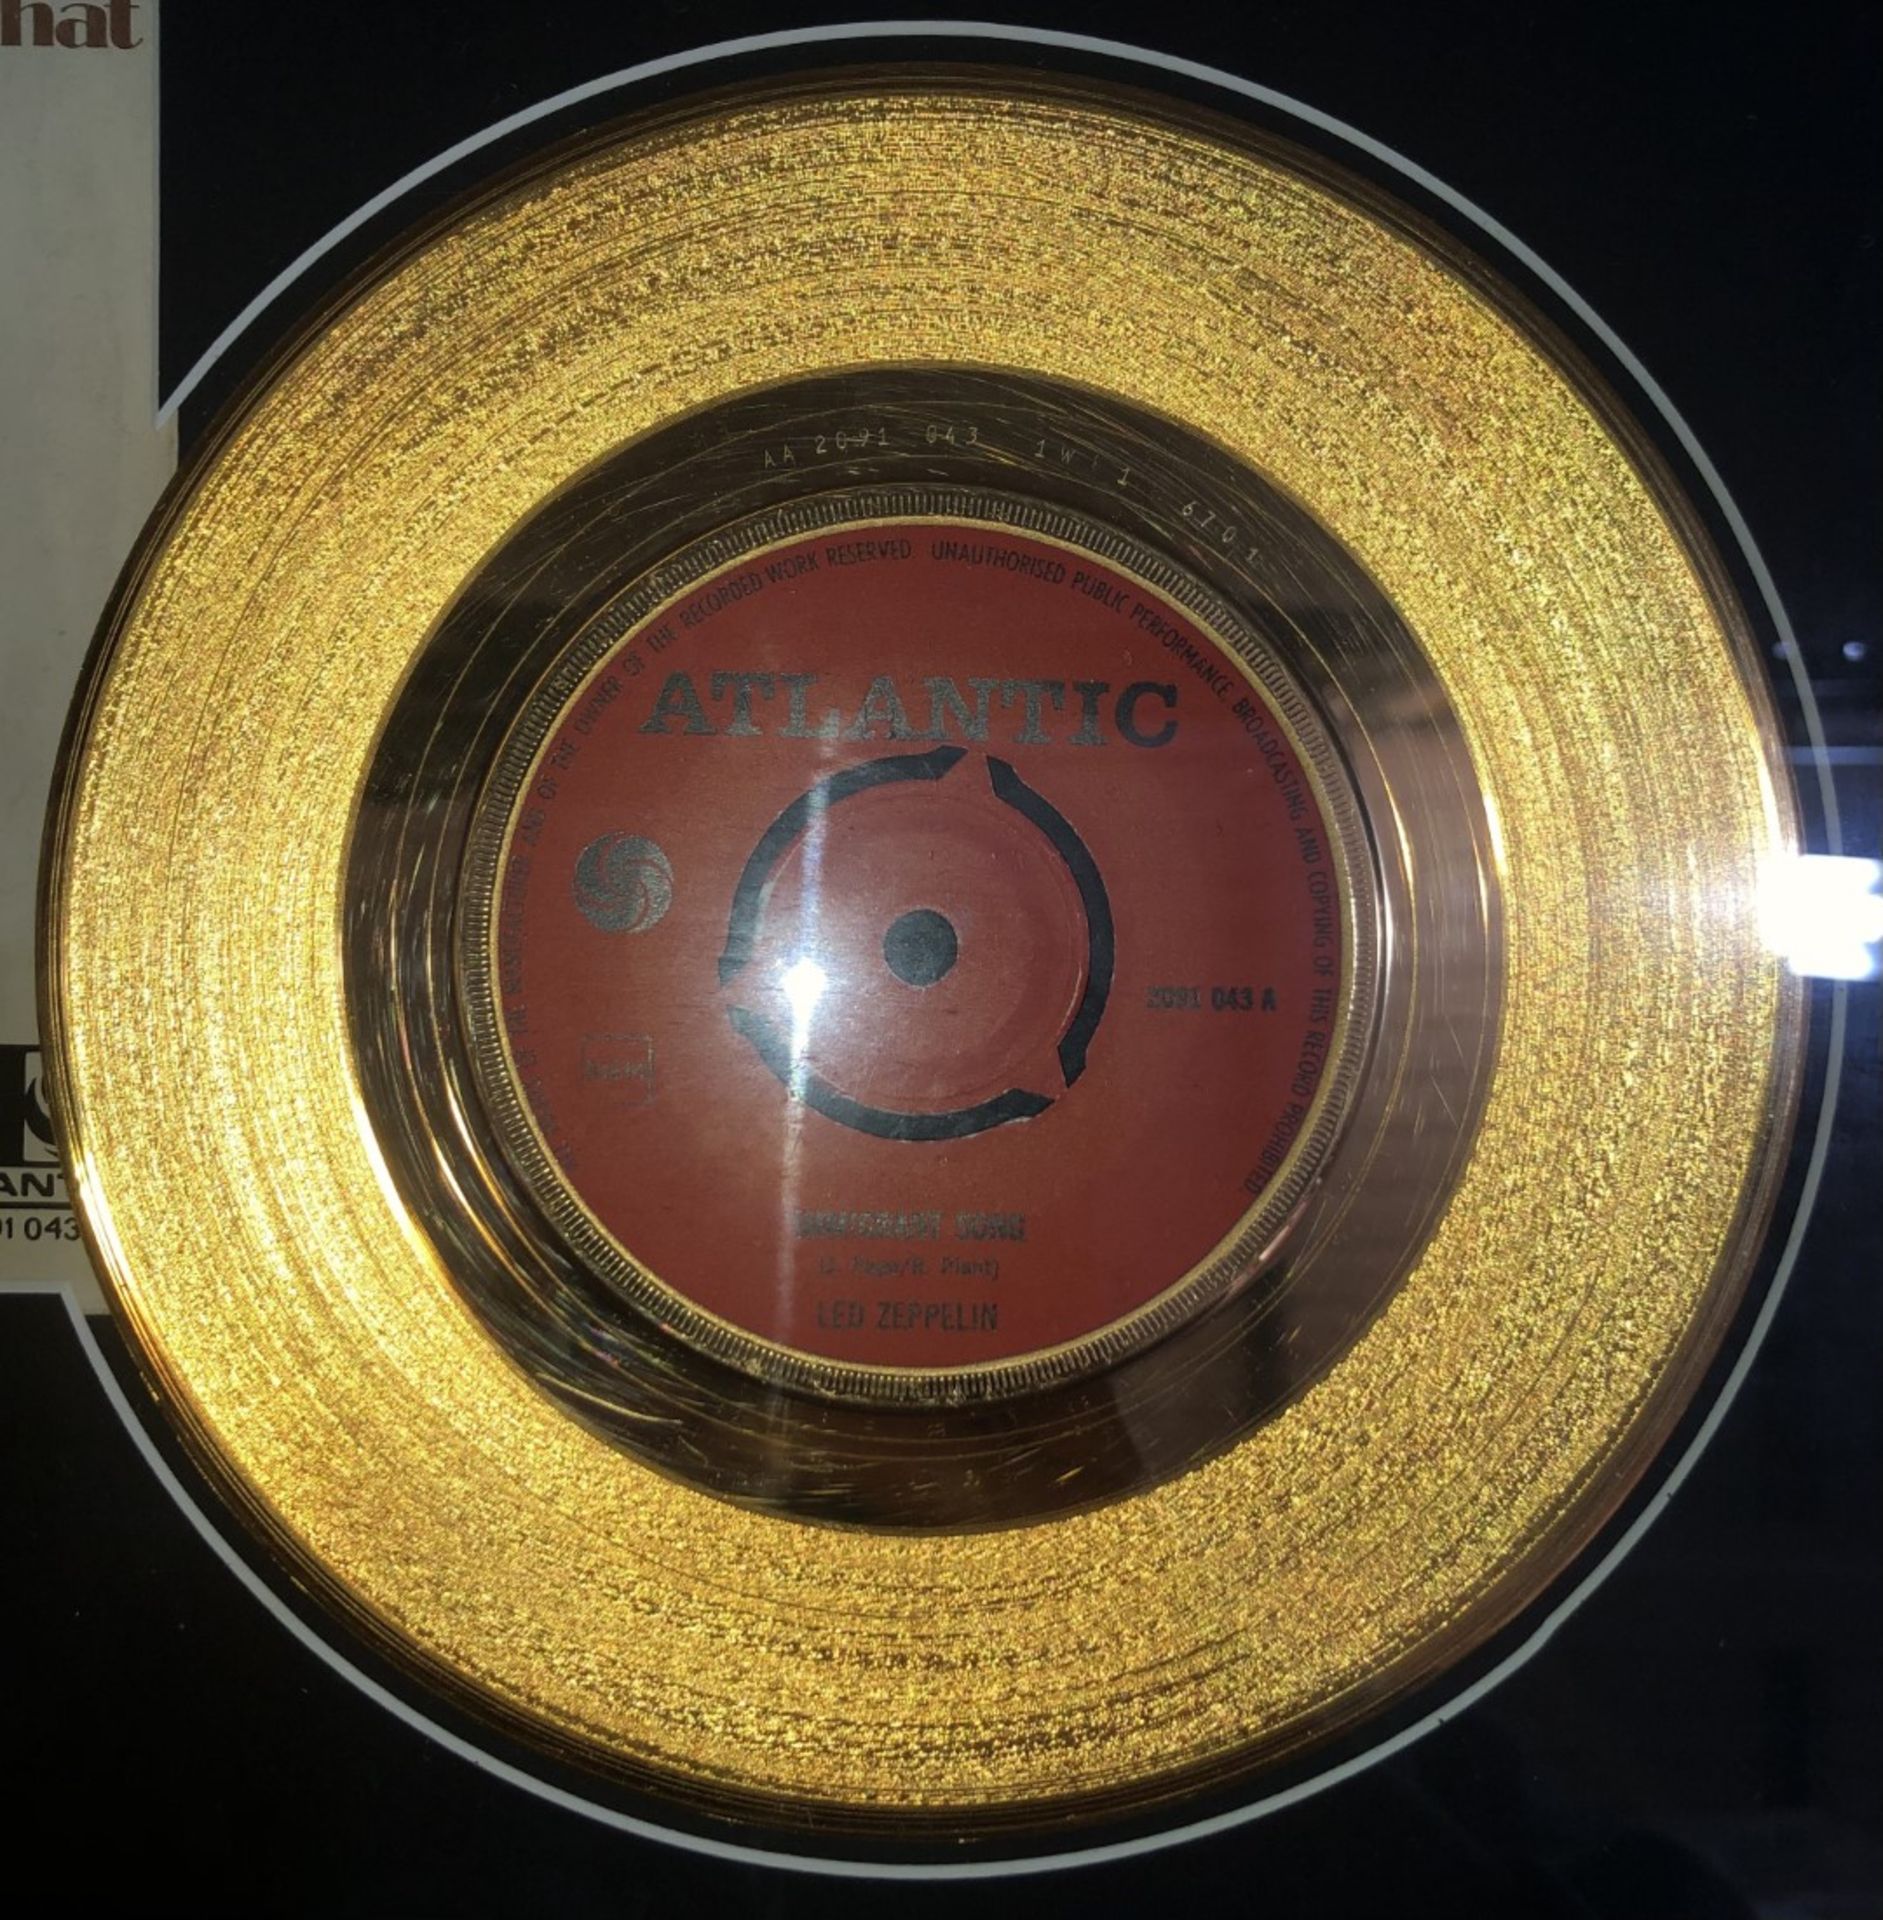 1 x 24 Carat Gold Coated 7 Inch Vinyl Record - LED ZEPPELIN IMMIGRANT SONG - Mounted and Presented - Image 4 of 5